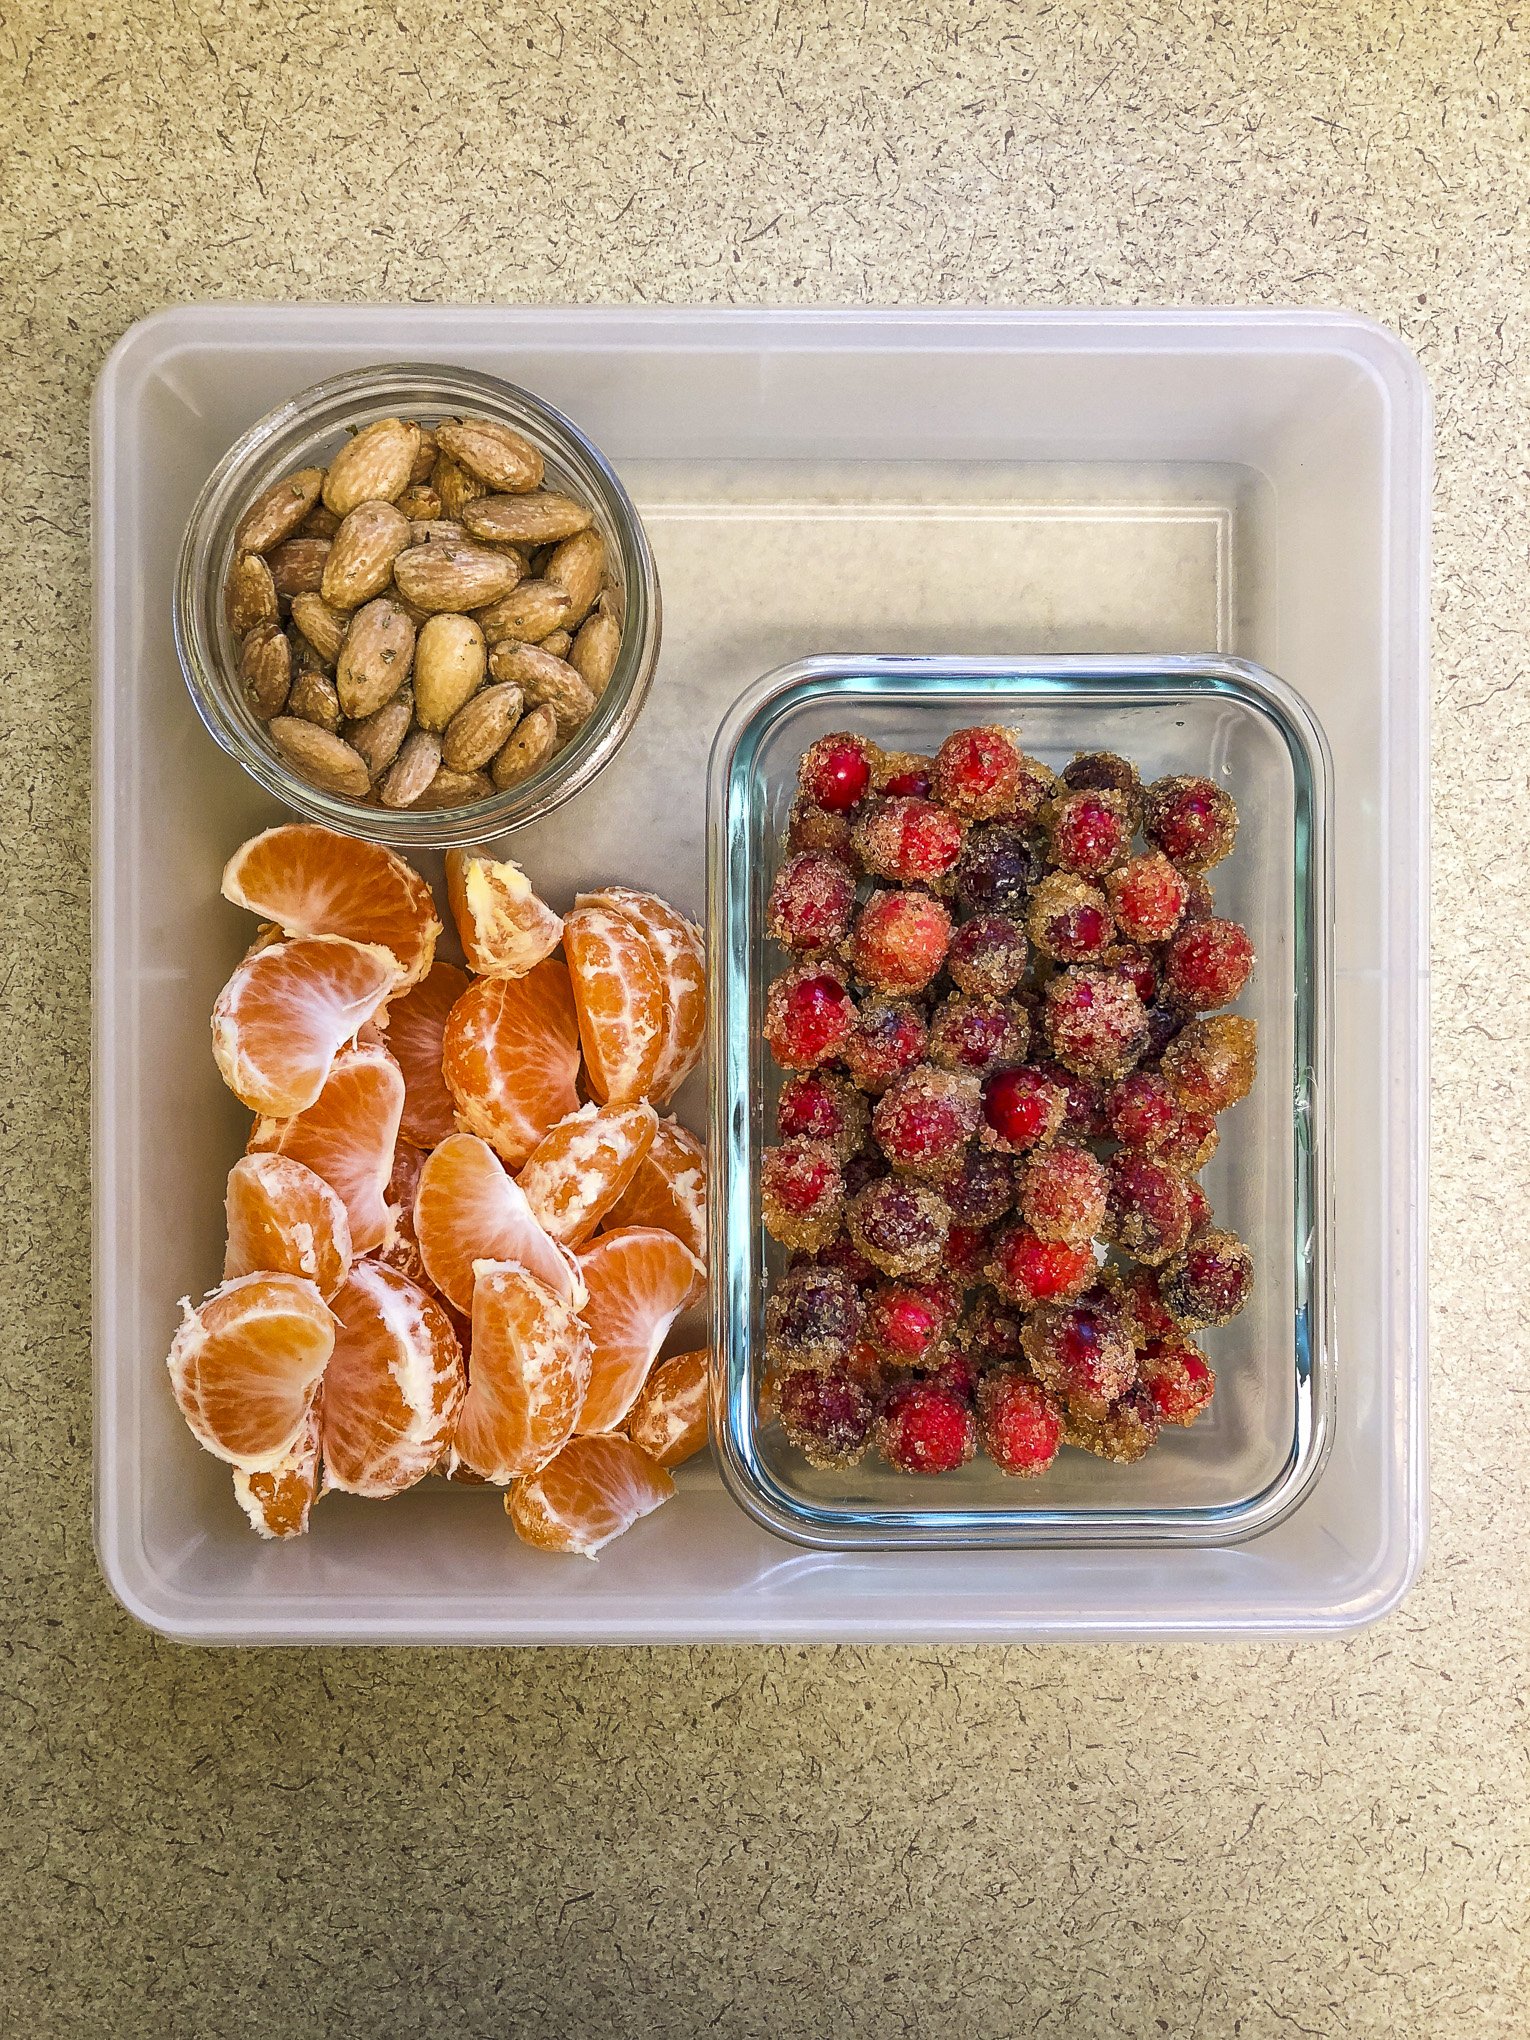 Tupperware filled with candied cranberries, almonds, and orange segments